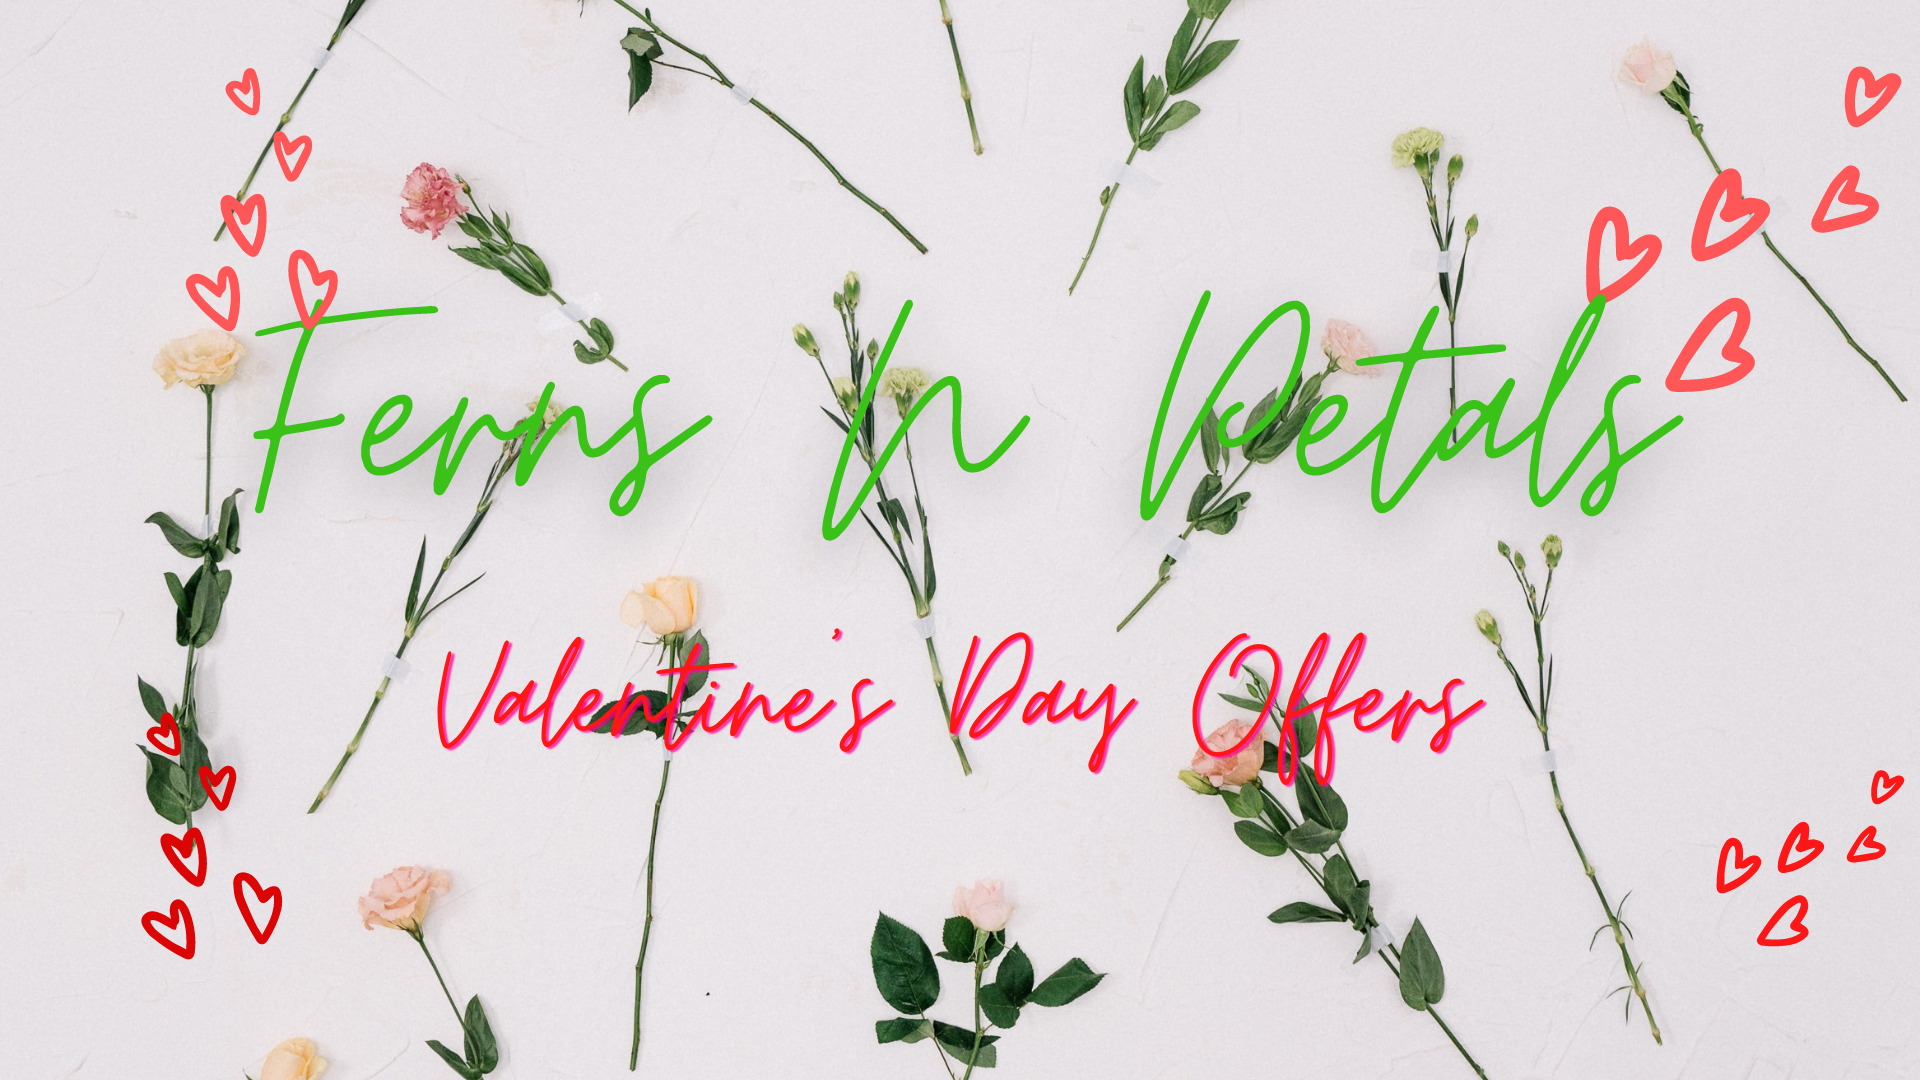 Ferns N Petals Valentine's Day Sale & Offers 2022- Flat 15% Off 